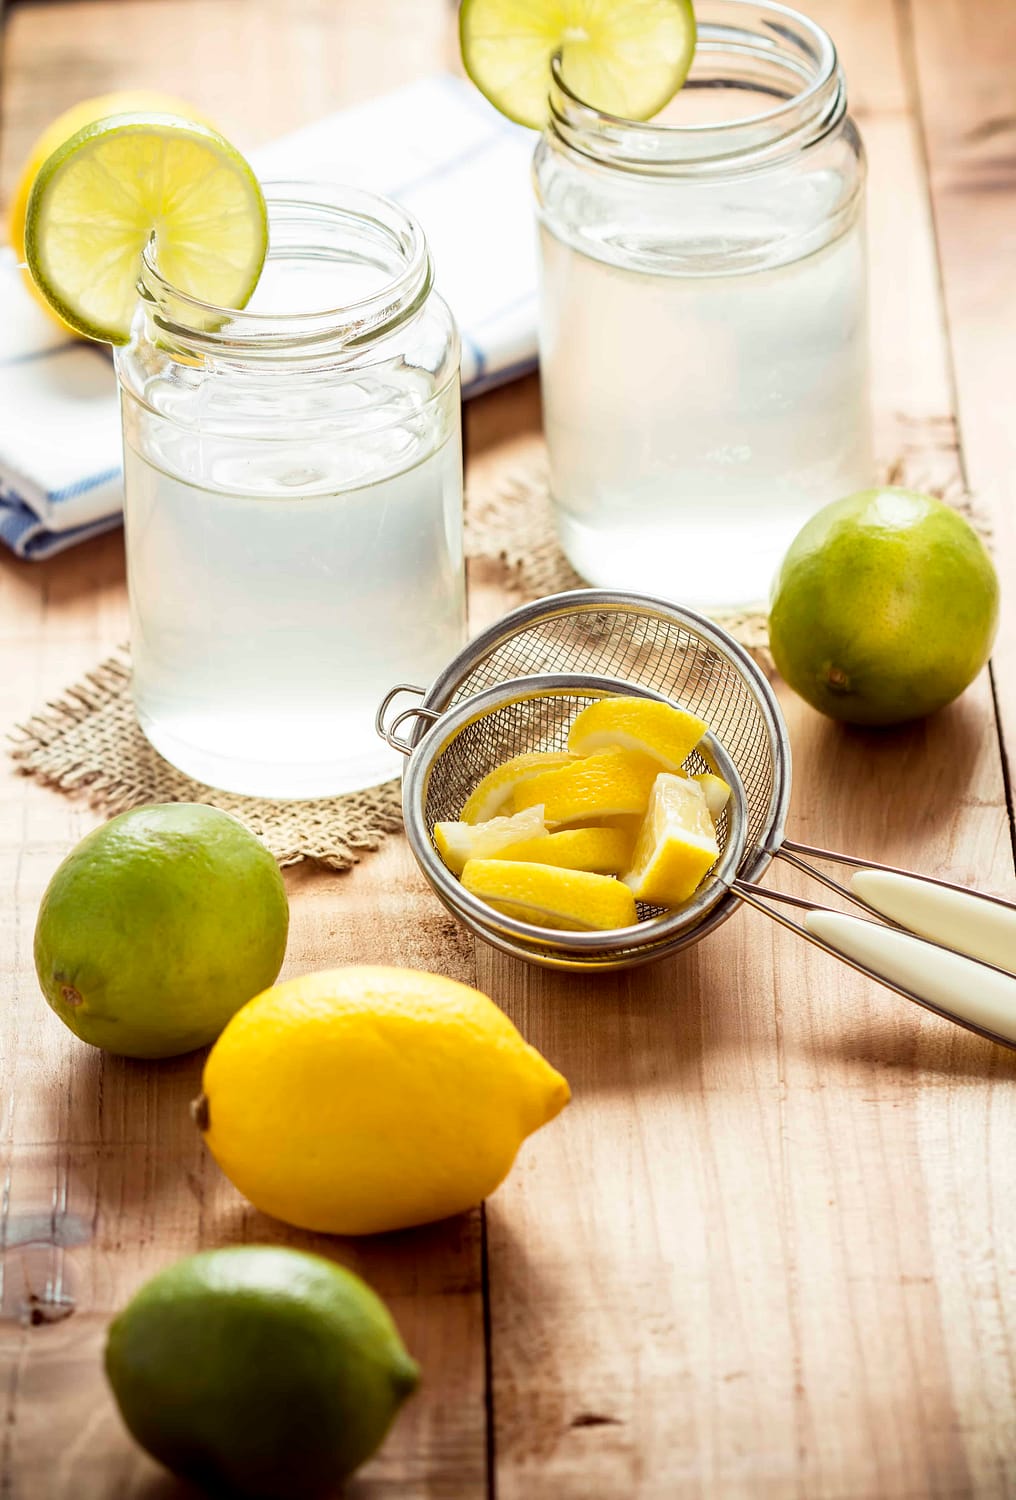 Lemons and limes on a wooden table next to a juice strainer and a glass of lemonade